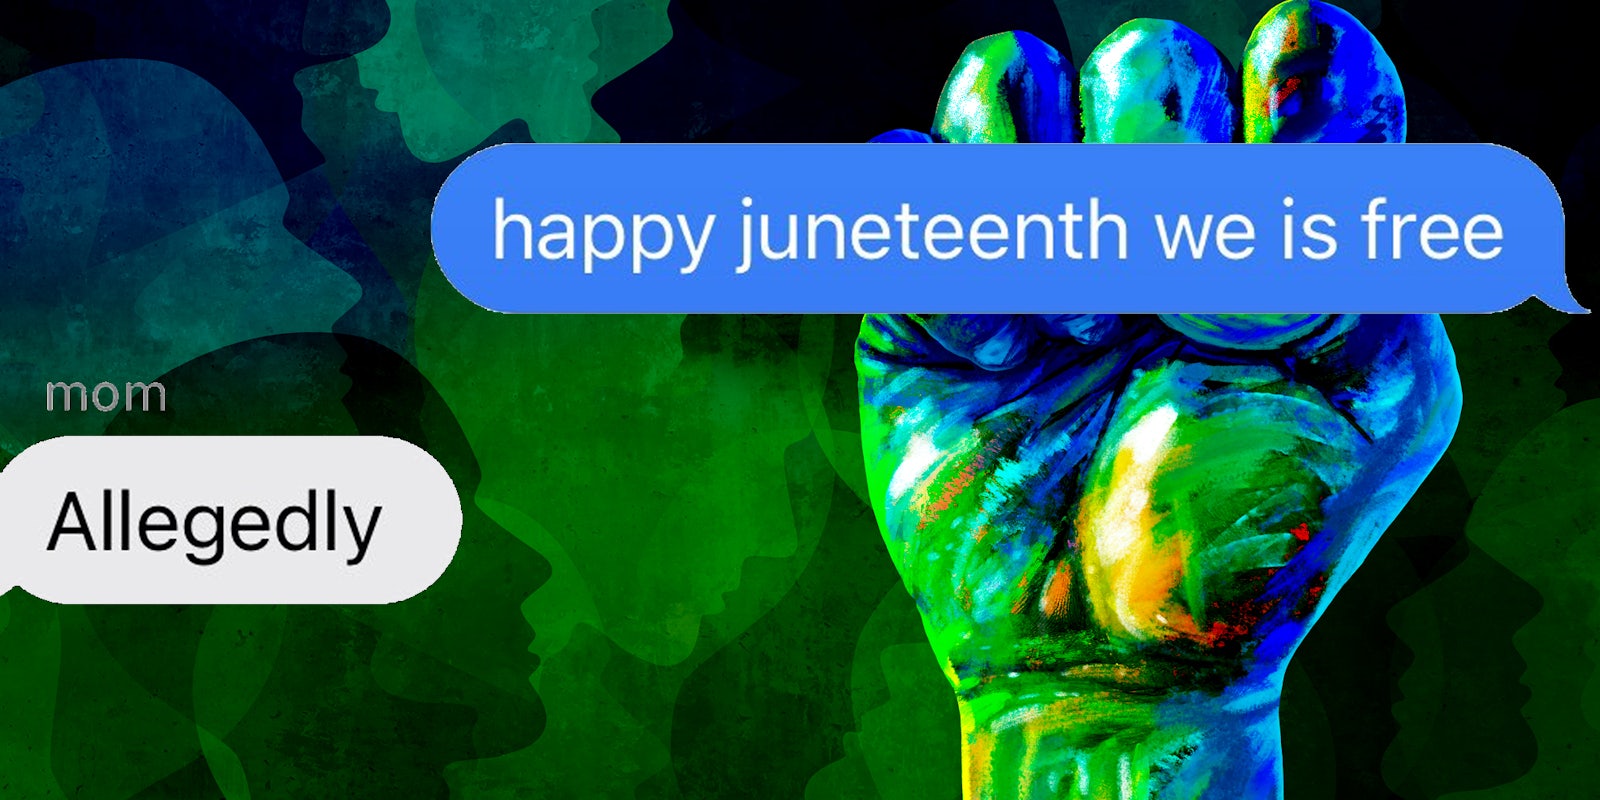 Fist being raised with text that says 'happy juneteeth we is free. Mom: allegedly'